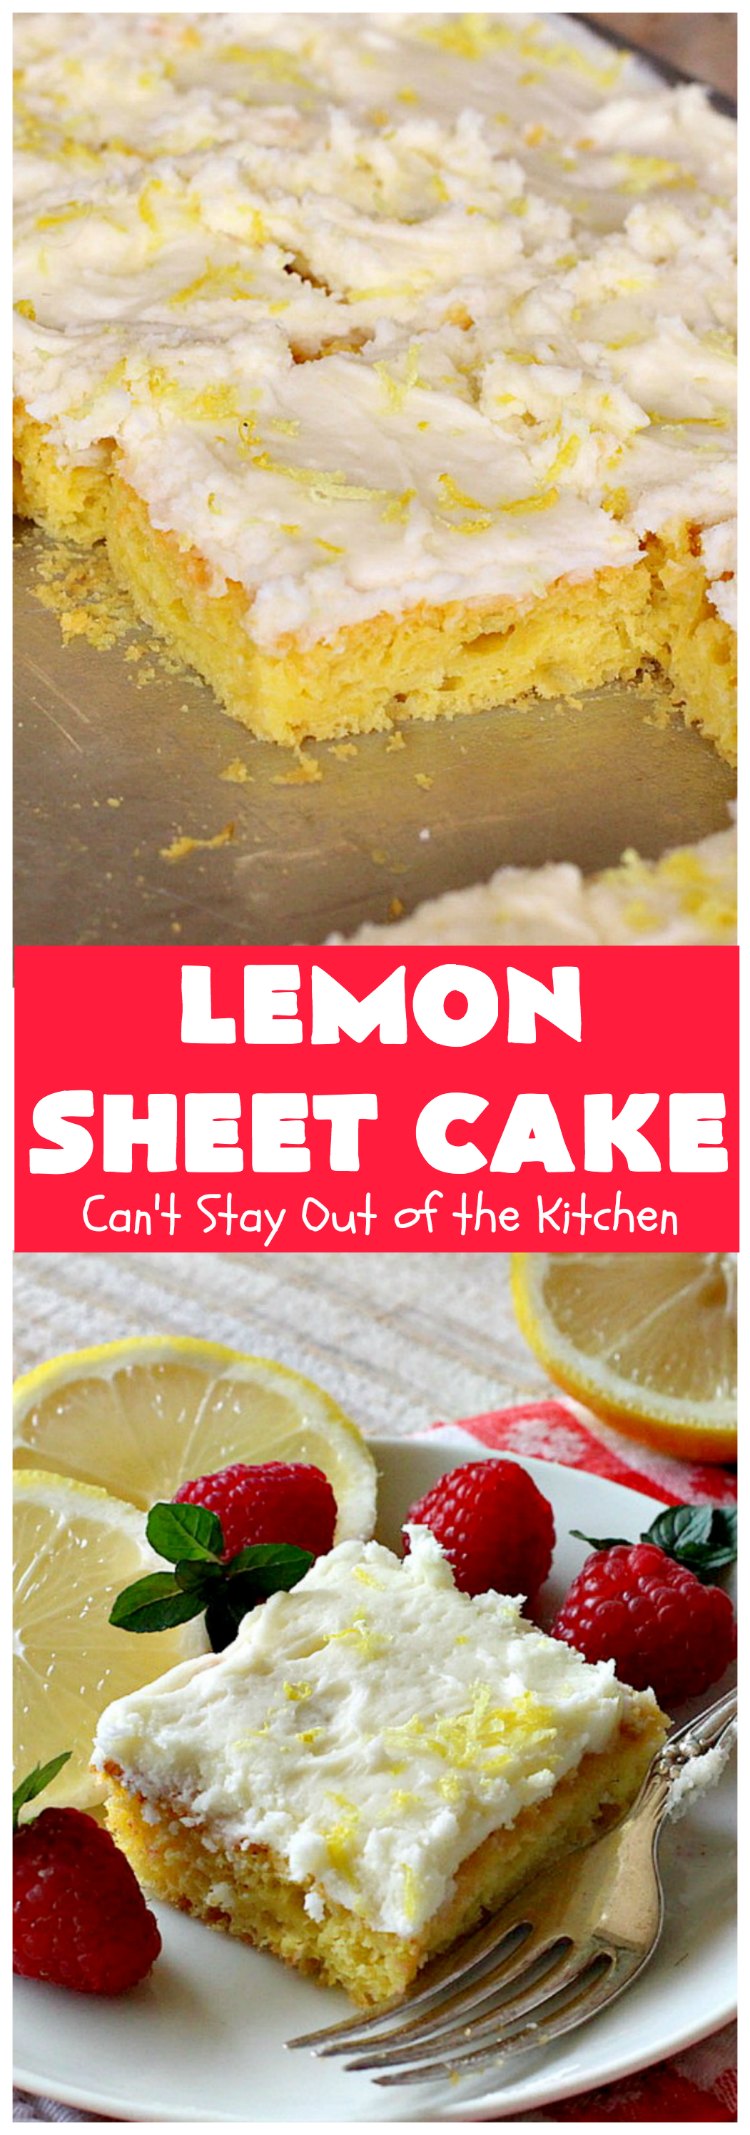 Lemon Sheet Cake | Can't Stay Out of the Kitchen | this delicious #lemon #cake uses only 8 ingredients for the cake & the icing. It's so easy, yet has a luscious lemony taste to die for! The #CreamCheese icing is wonderful. #dessert #tailgating #LemonDessert #LemonSheetCake #Holiday #HolidayDessert